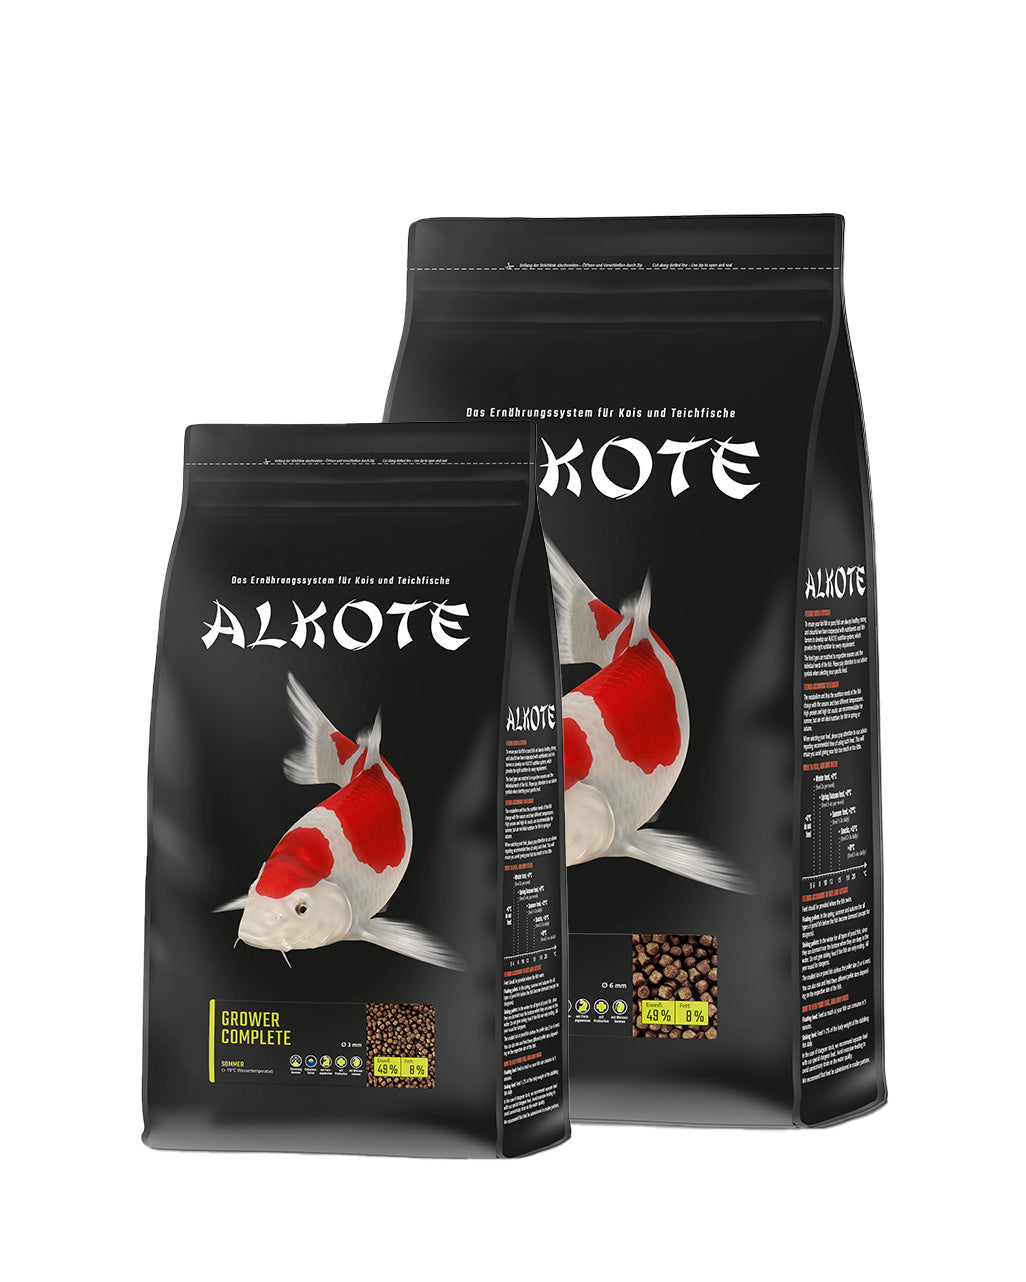 Alkote Grower Complete